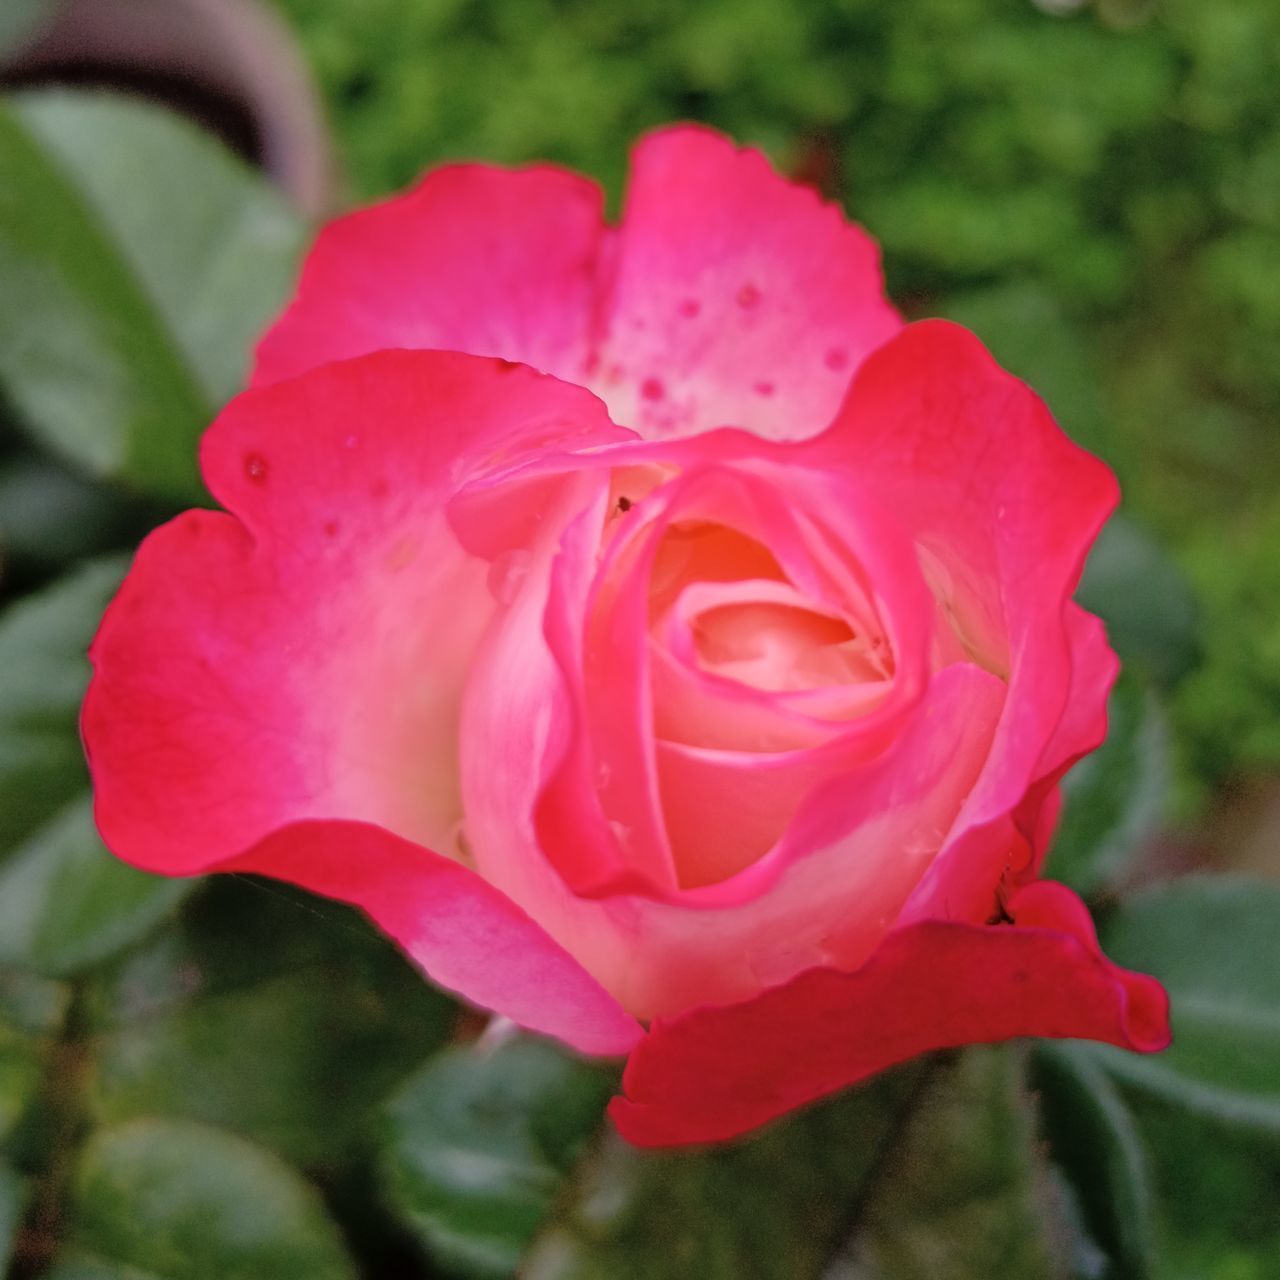 CLOSE-UP OF PINK ROSE WITH RED ROSES